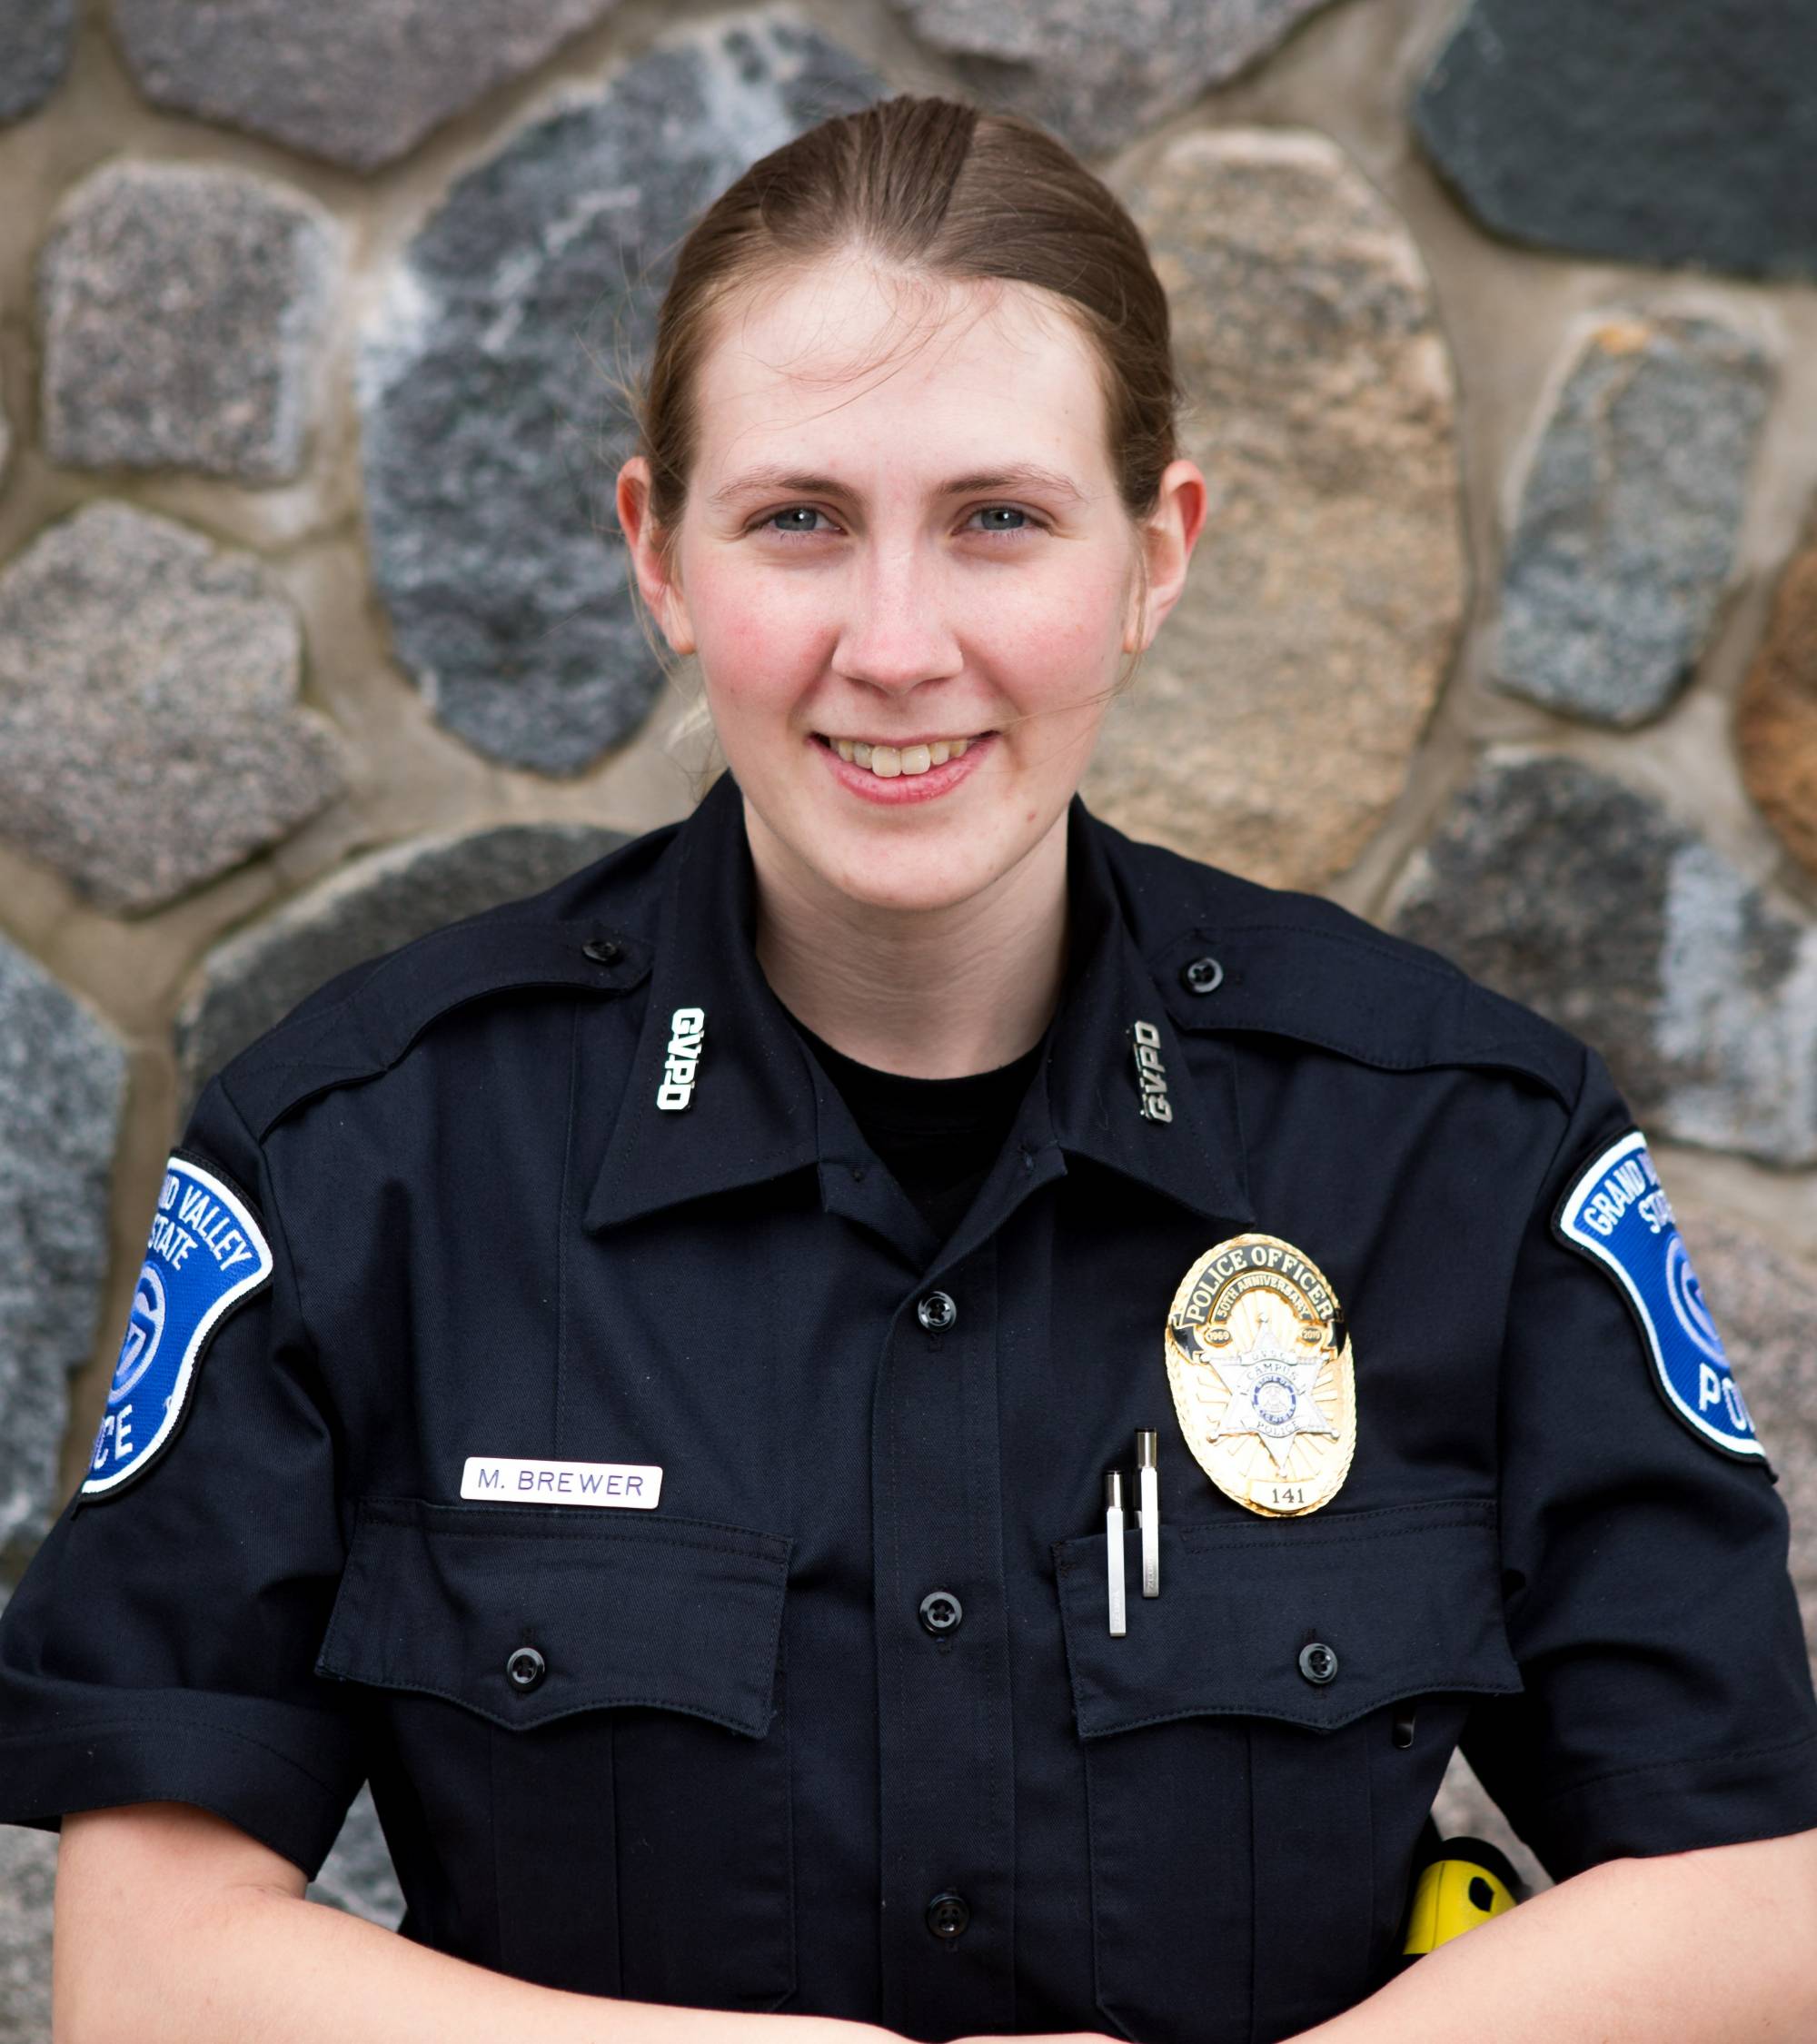 Community Police Officer Brewer